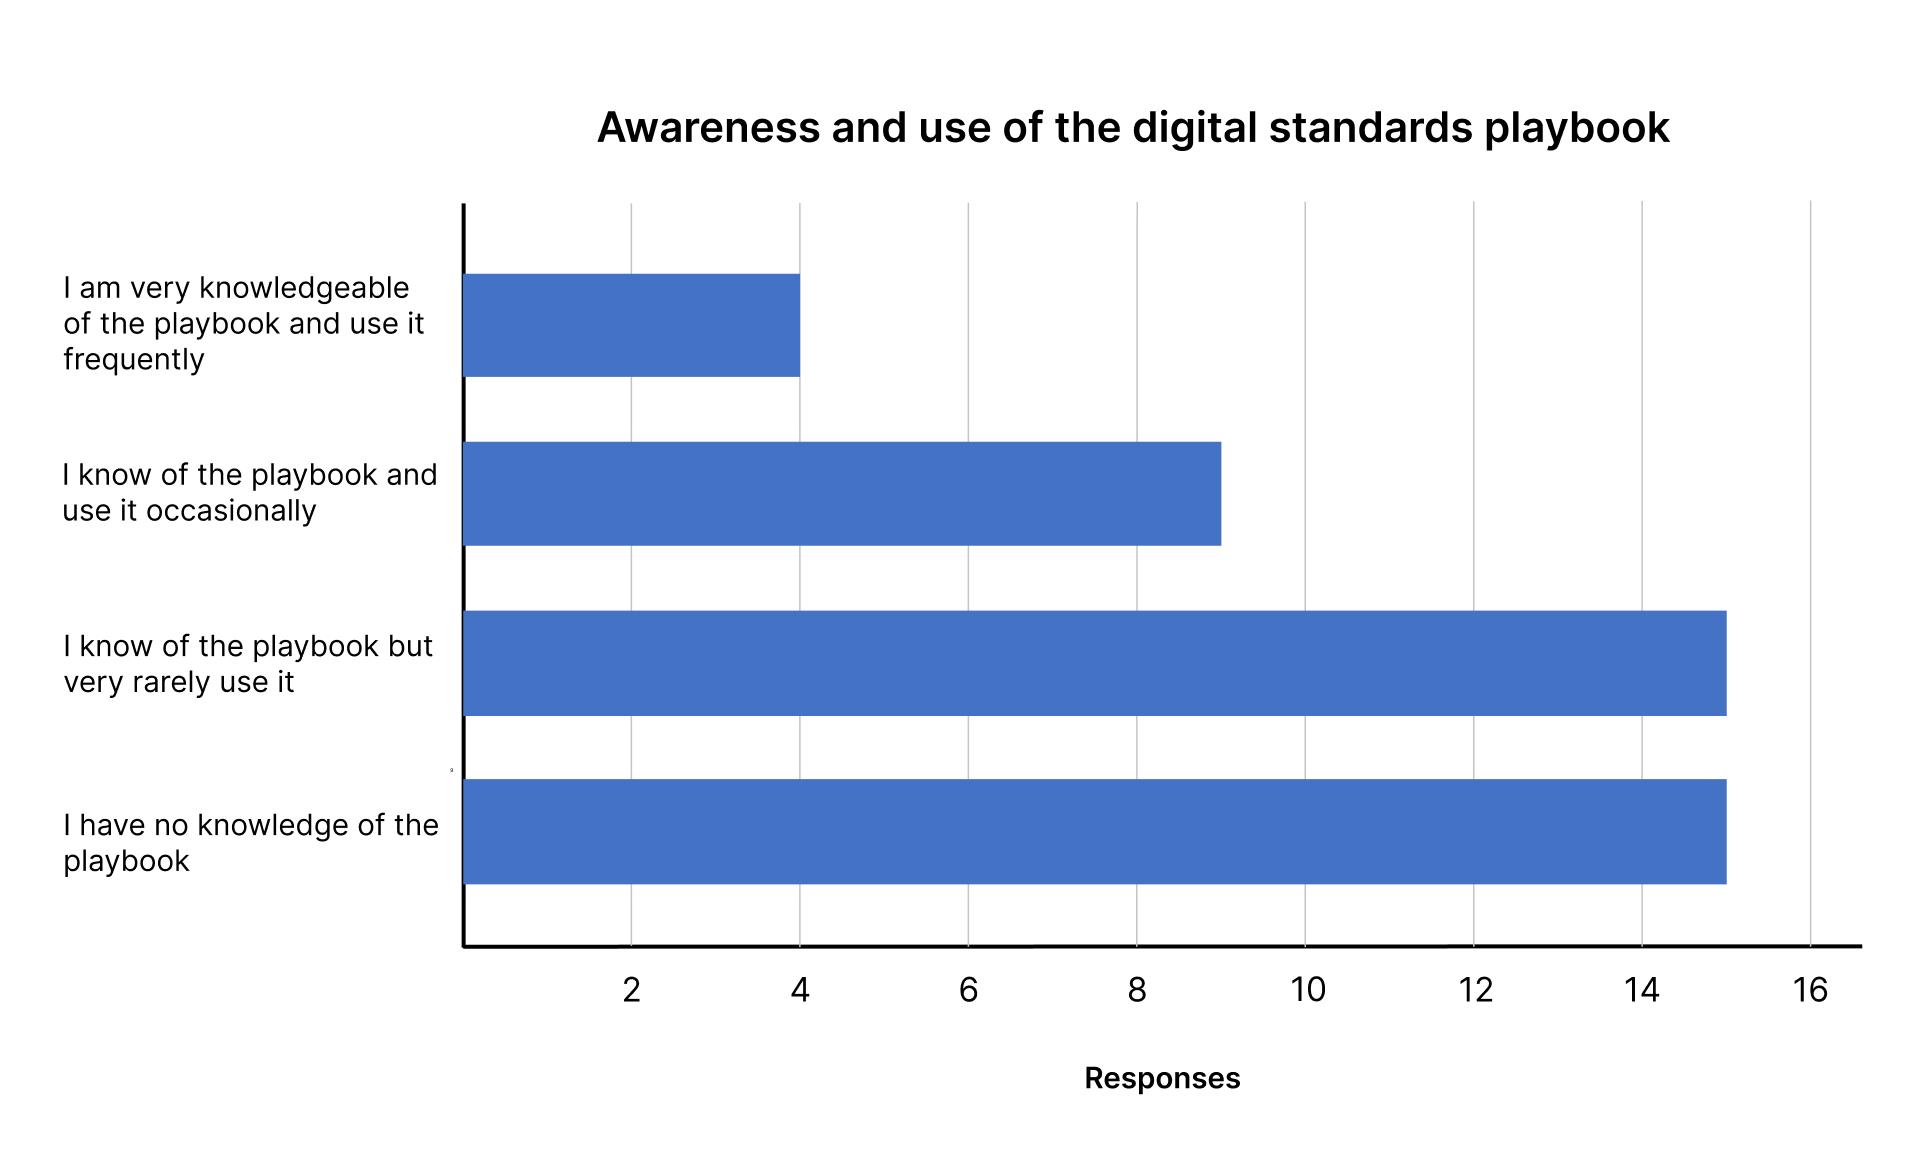 Awareness and use of the digital standards playbook (bar graph)